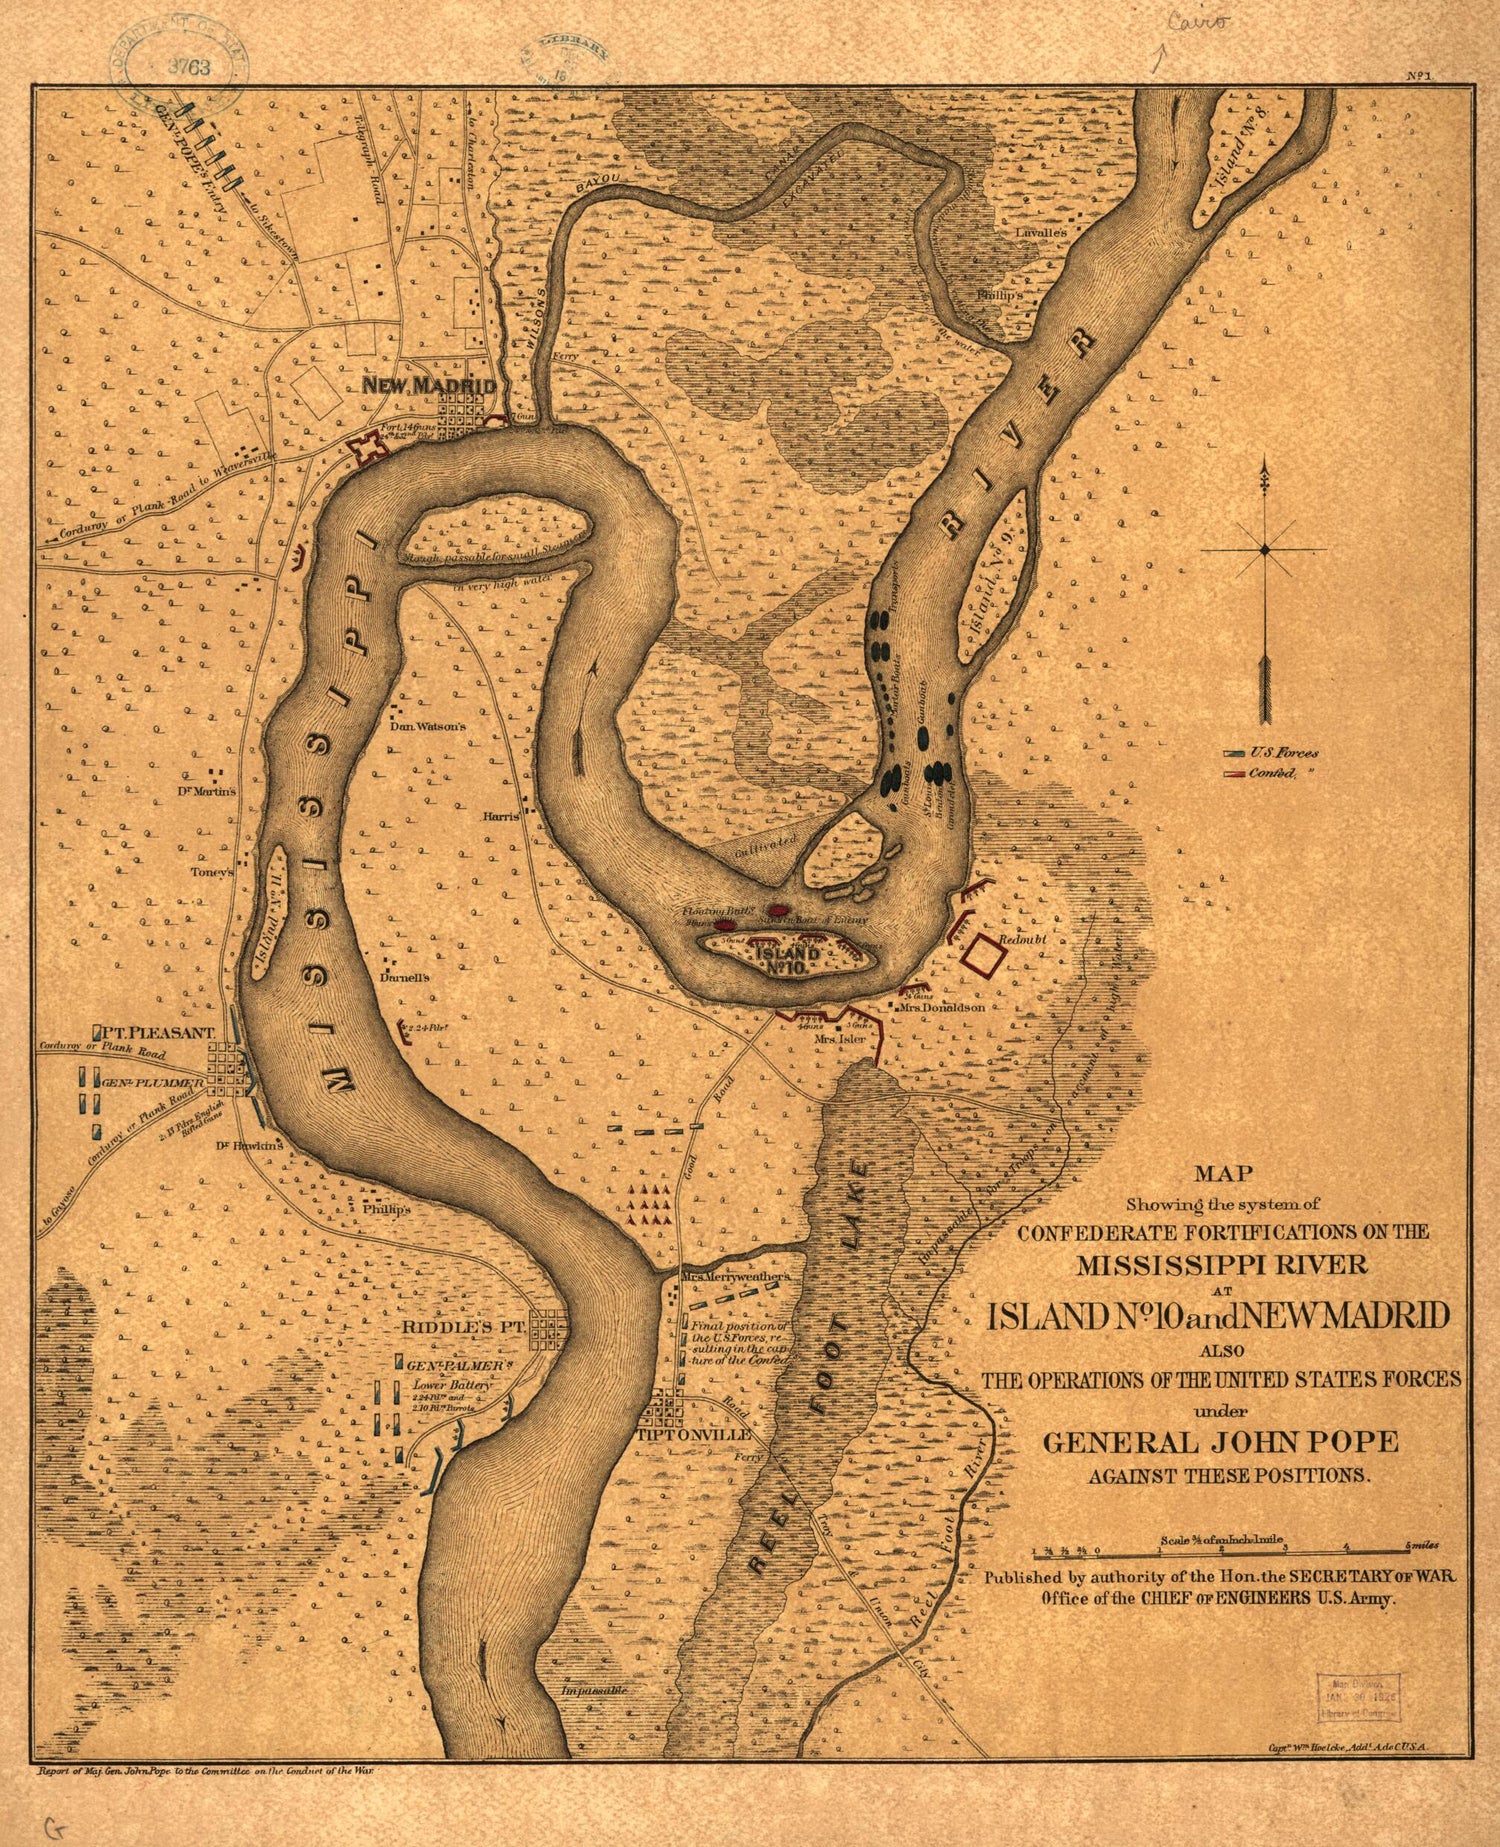 This old map of Map Showing the System of Confederate Fortifications On the Mississippi River at Island No. 10 and New Madrid, Also the Operations of the United States Forces Under General John Pope Against These Positions from 1862 was created by Wm Hoe